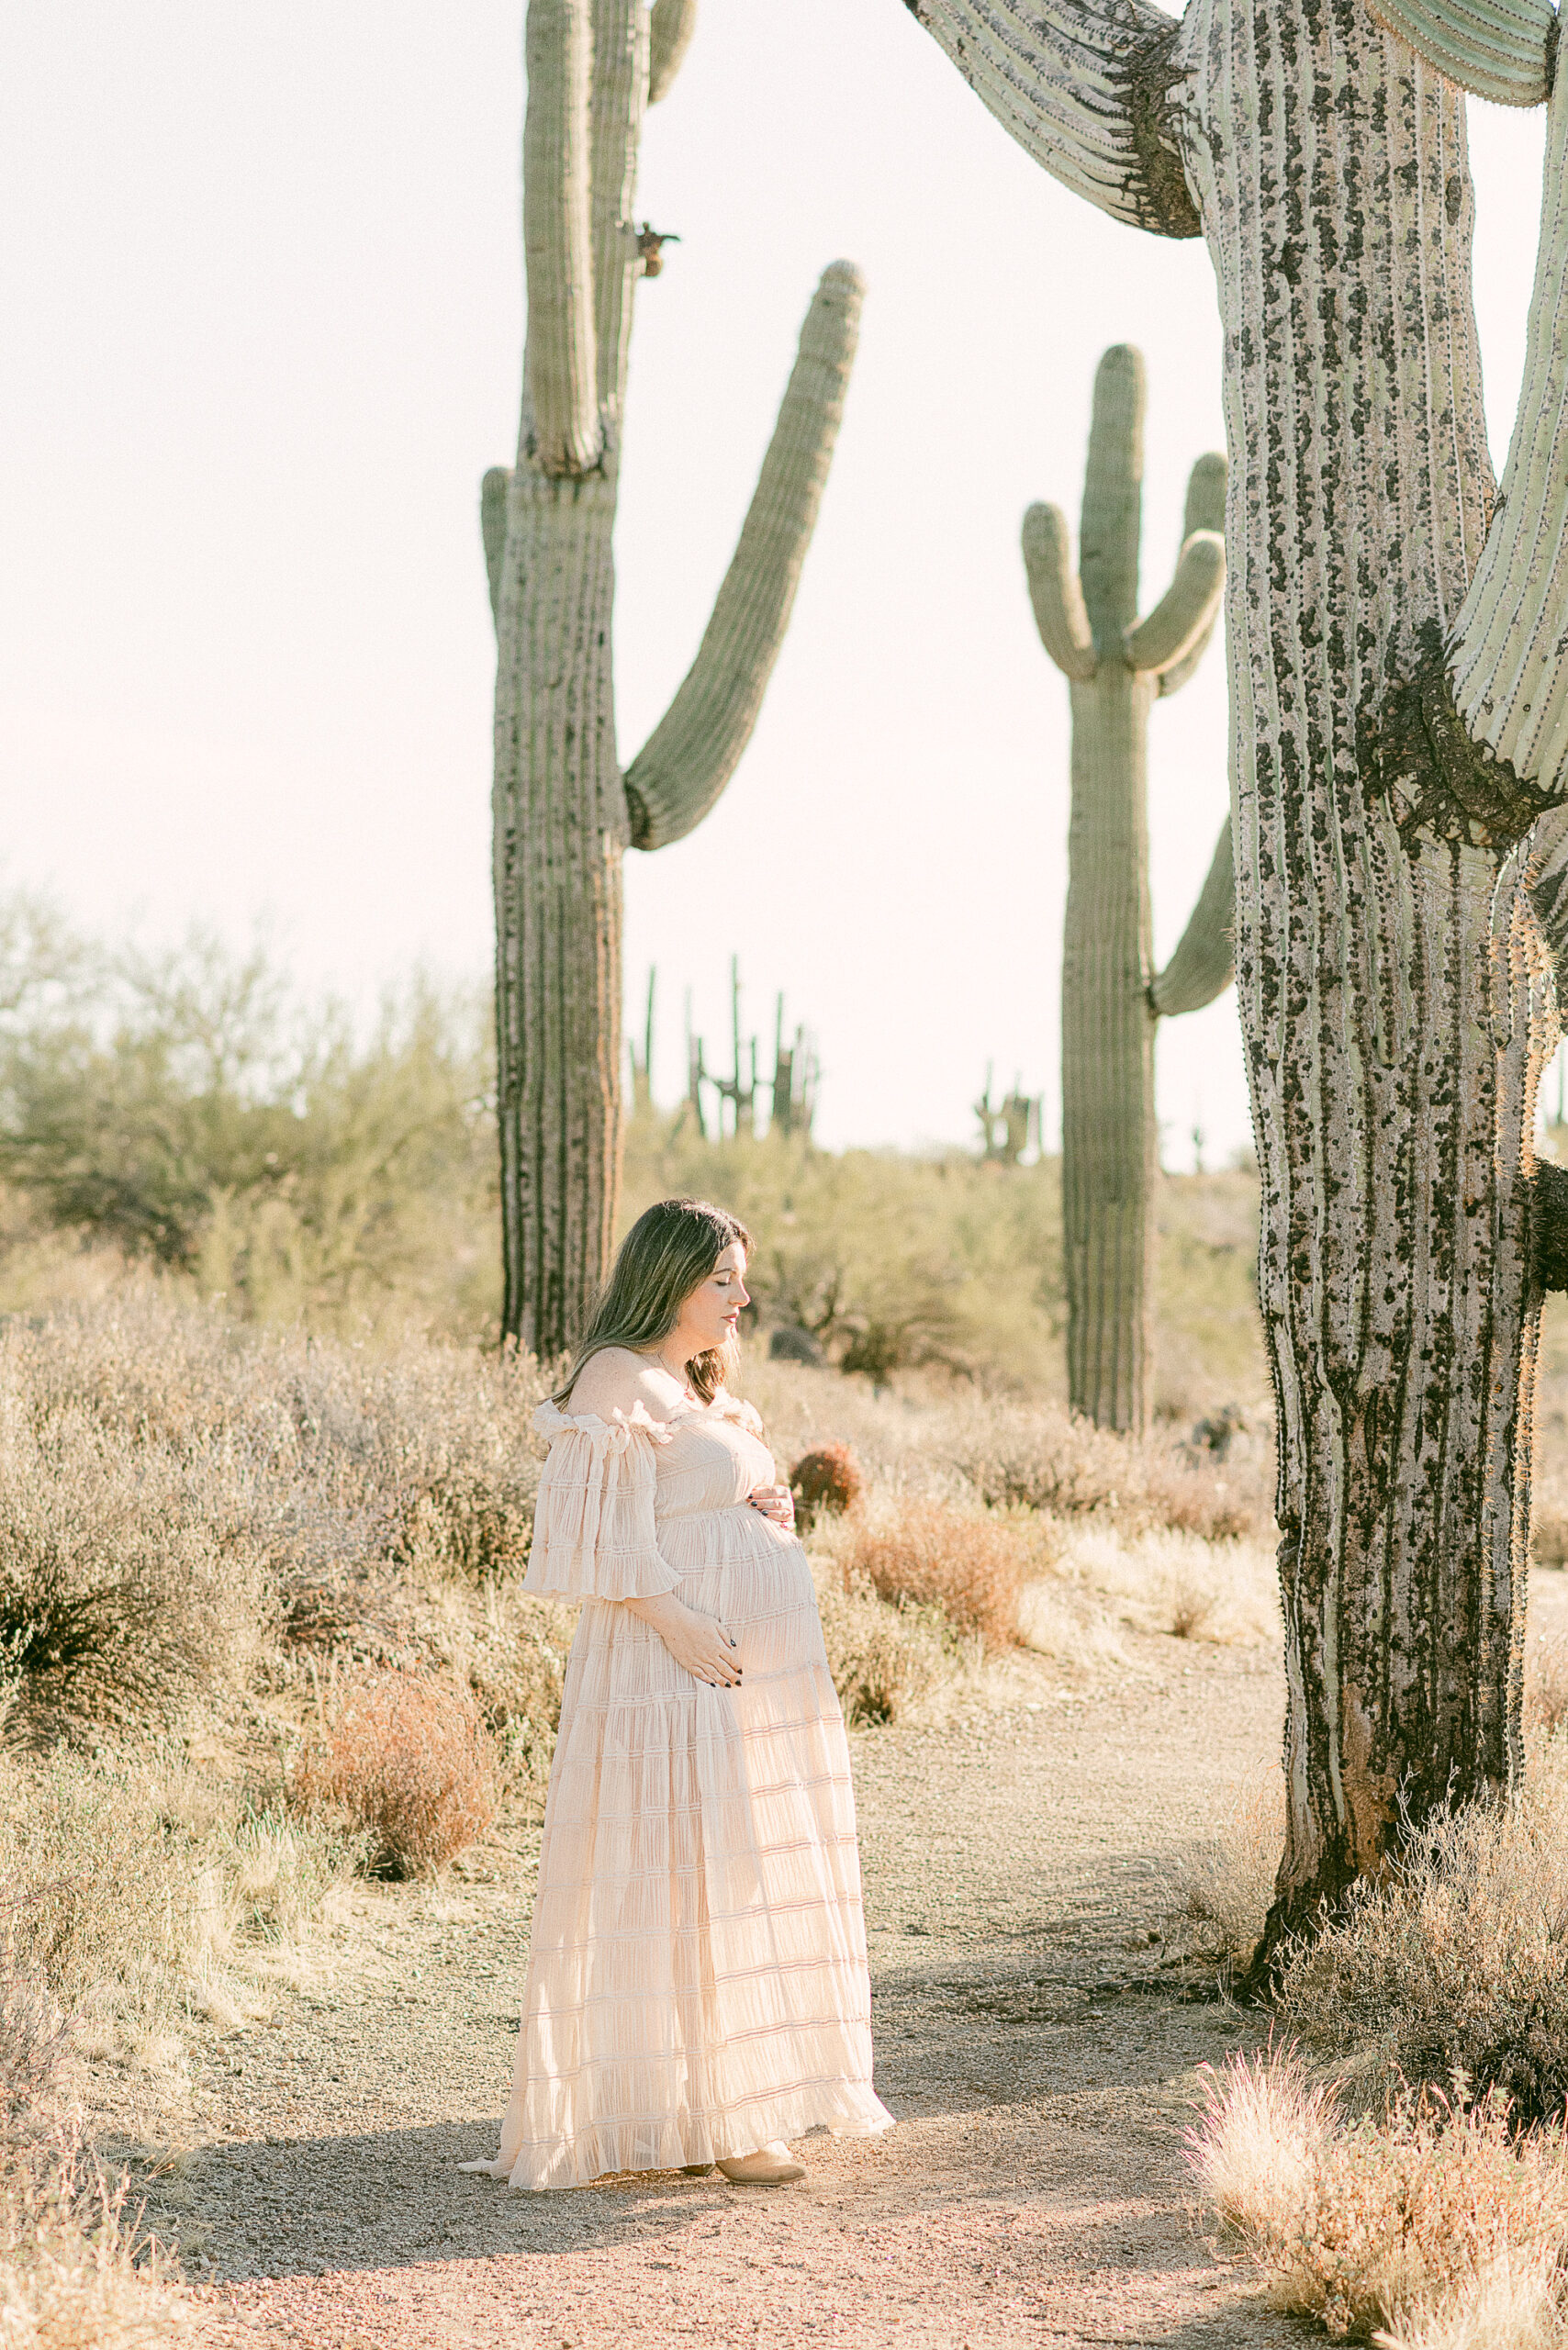 Mom holding baby bump surrounded by saguaro cactus for desert maternity session